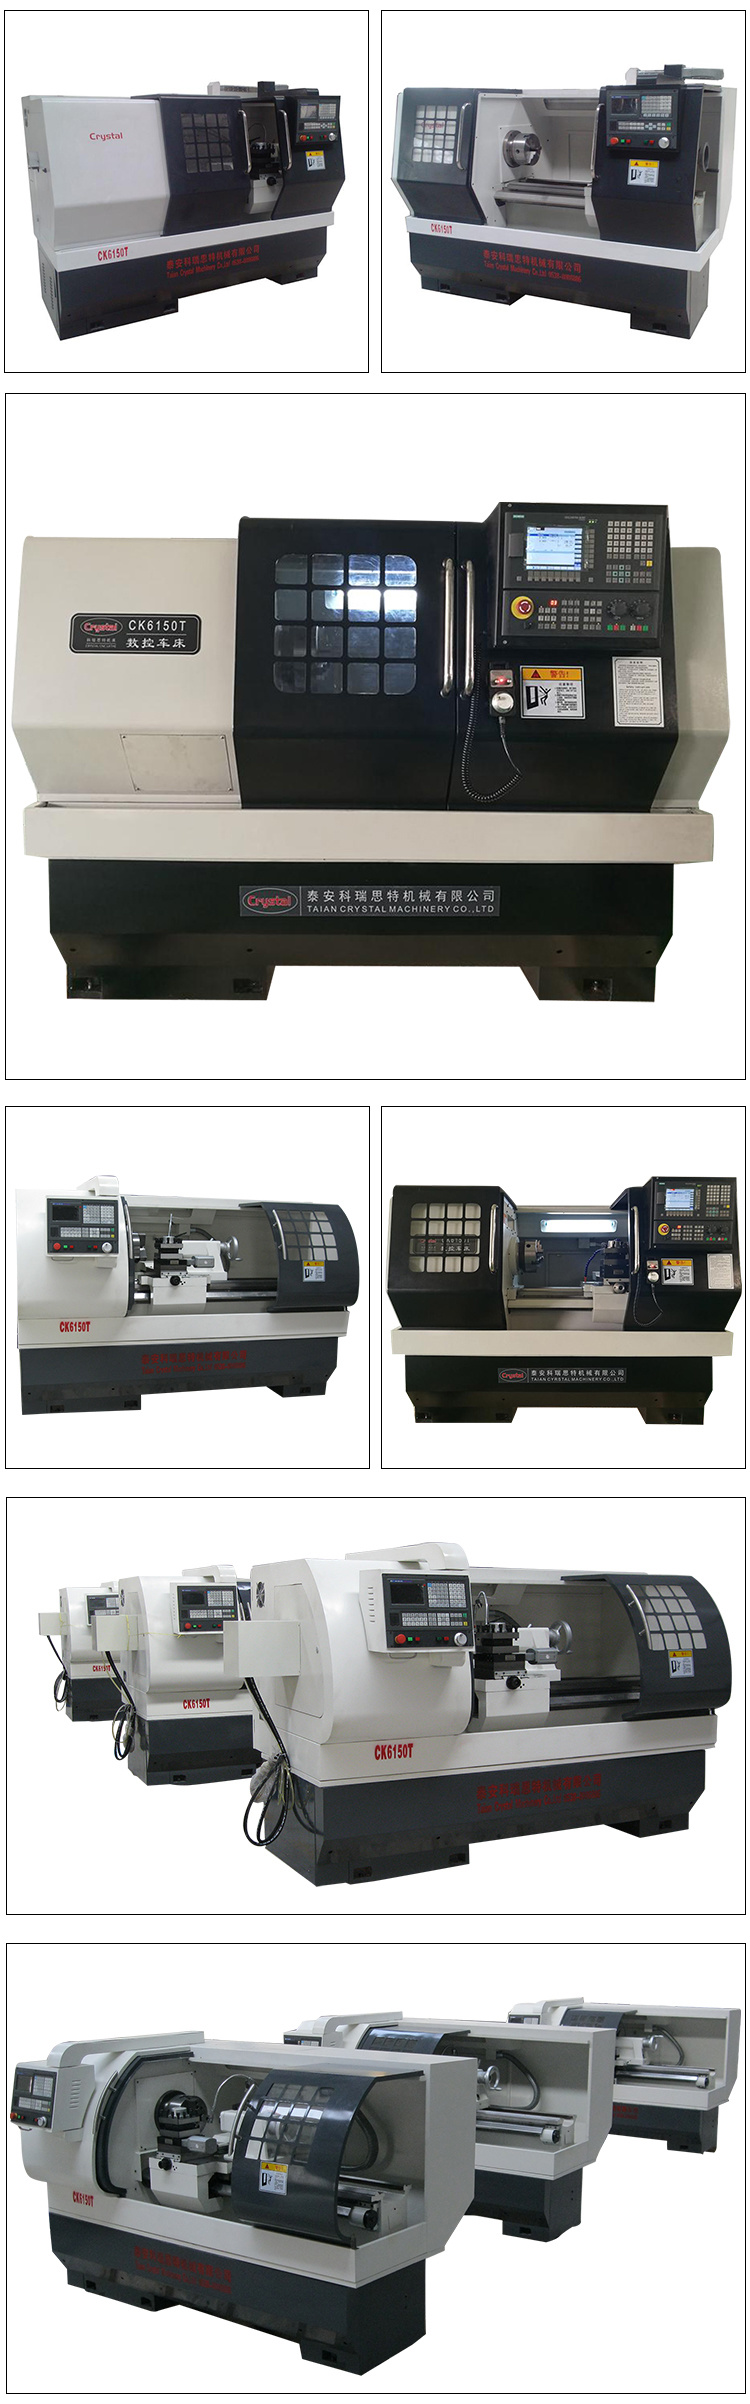 New Technology CNC Metal Lathe Machine Tools Manufacture Bed Ck6150t